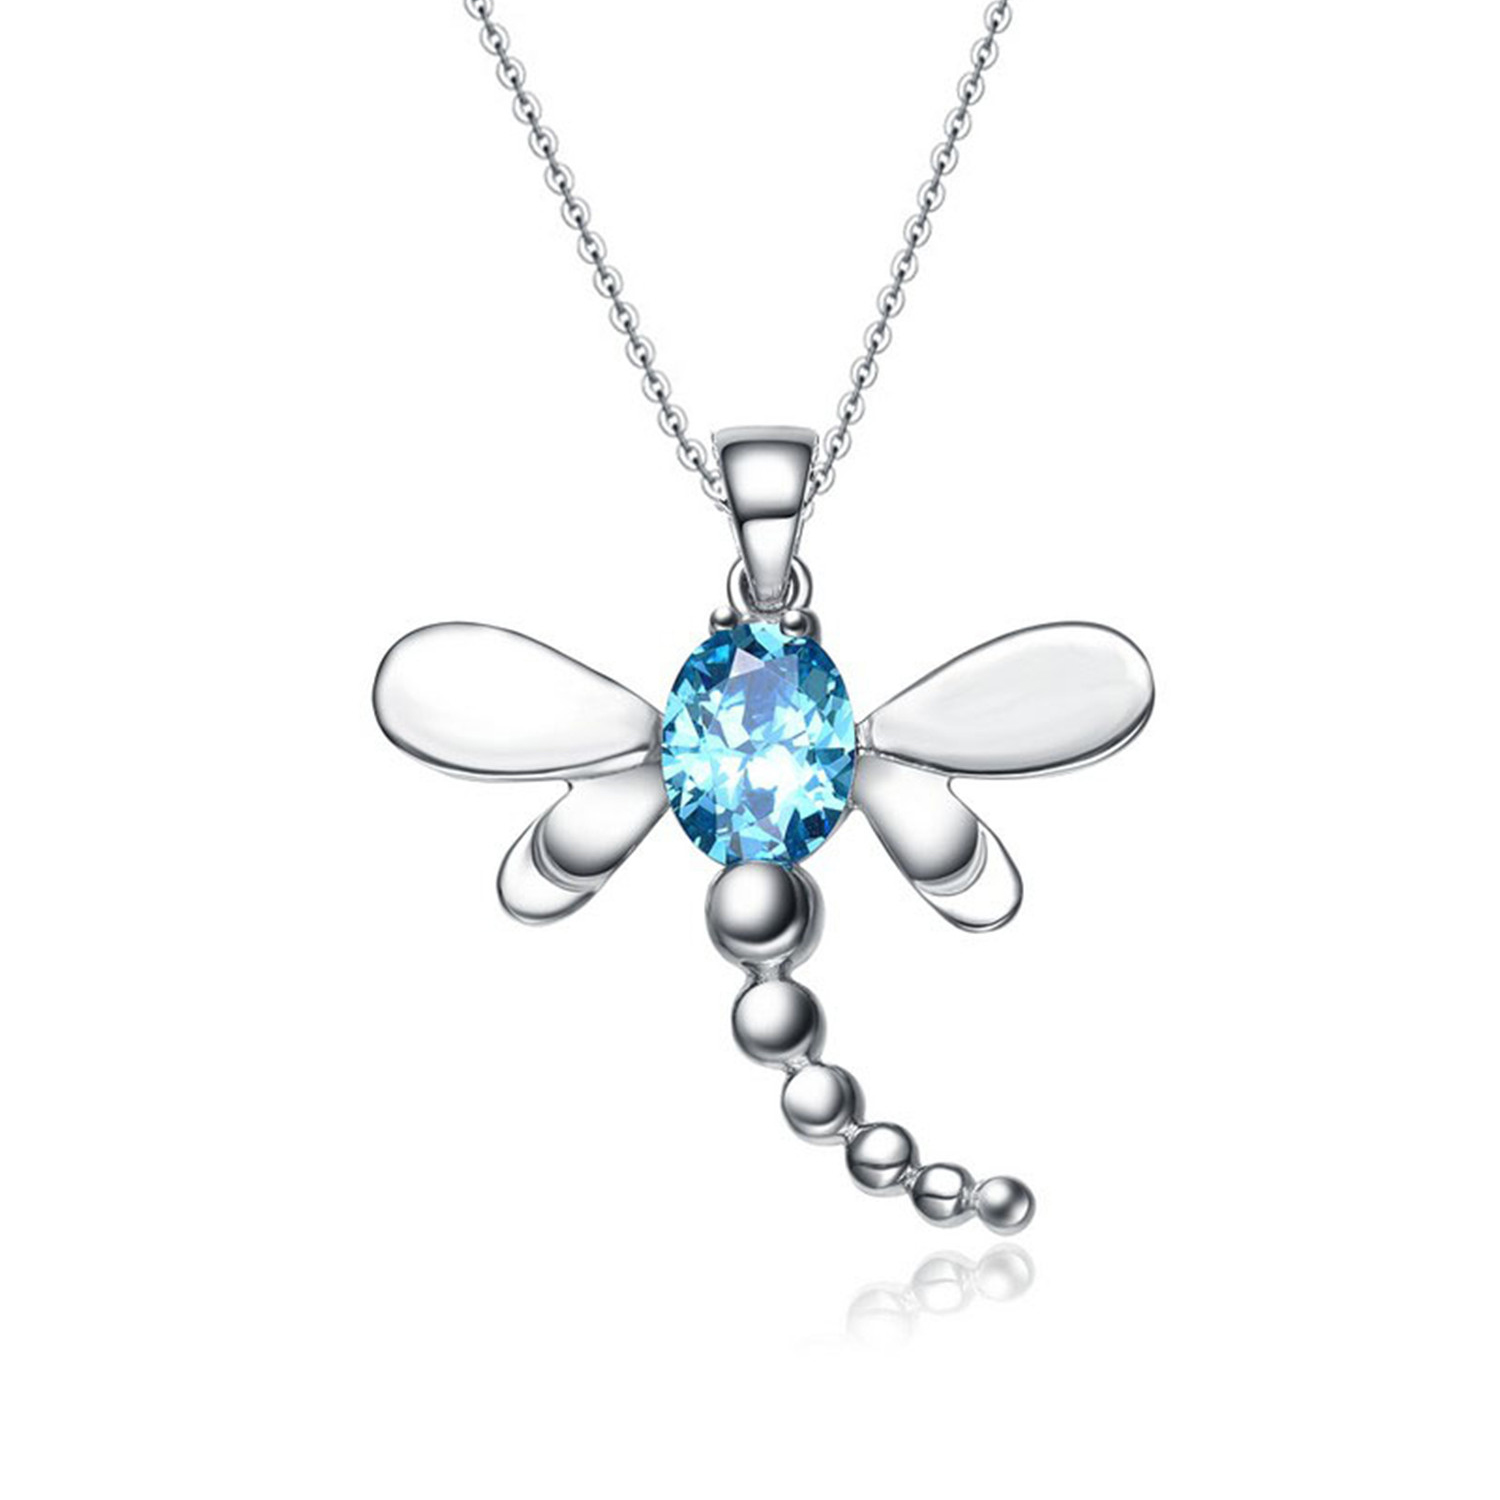 Factory Cubic Zircon Dragonfly Pendant 925 Silver Necklace Chain Necklaces